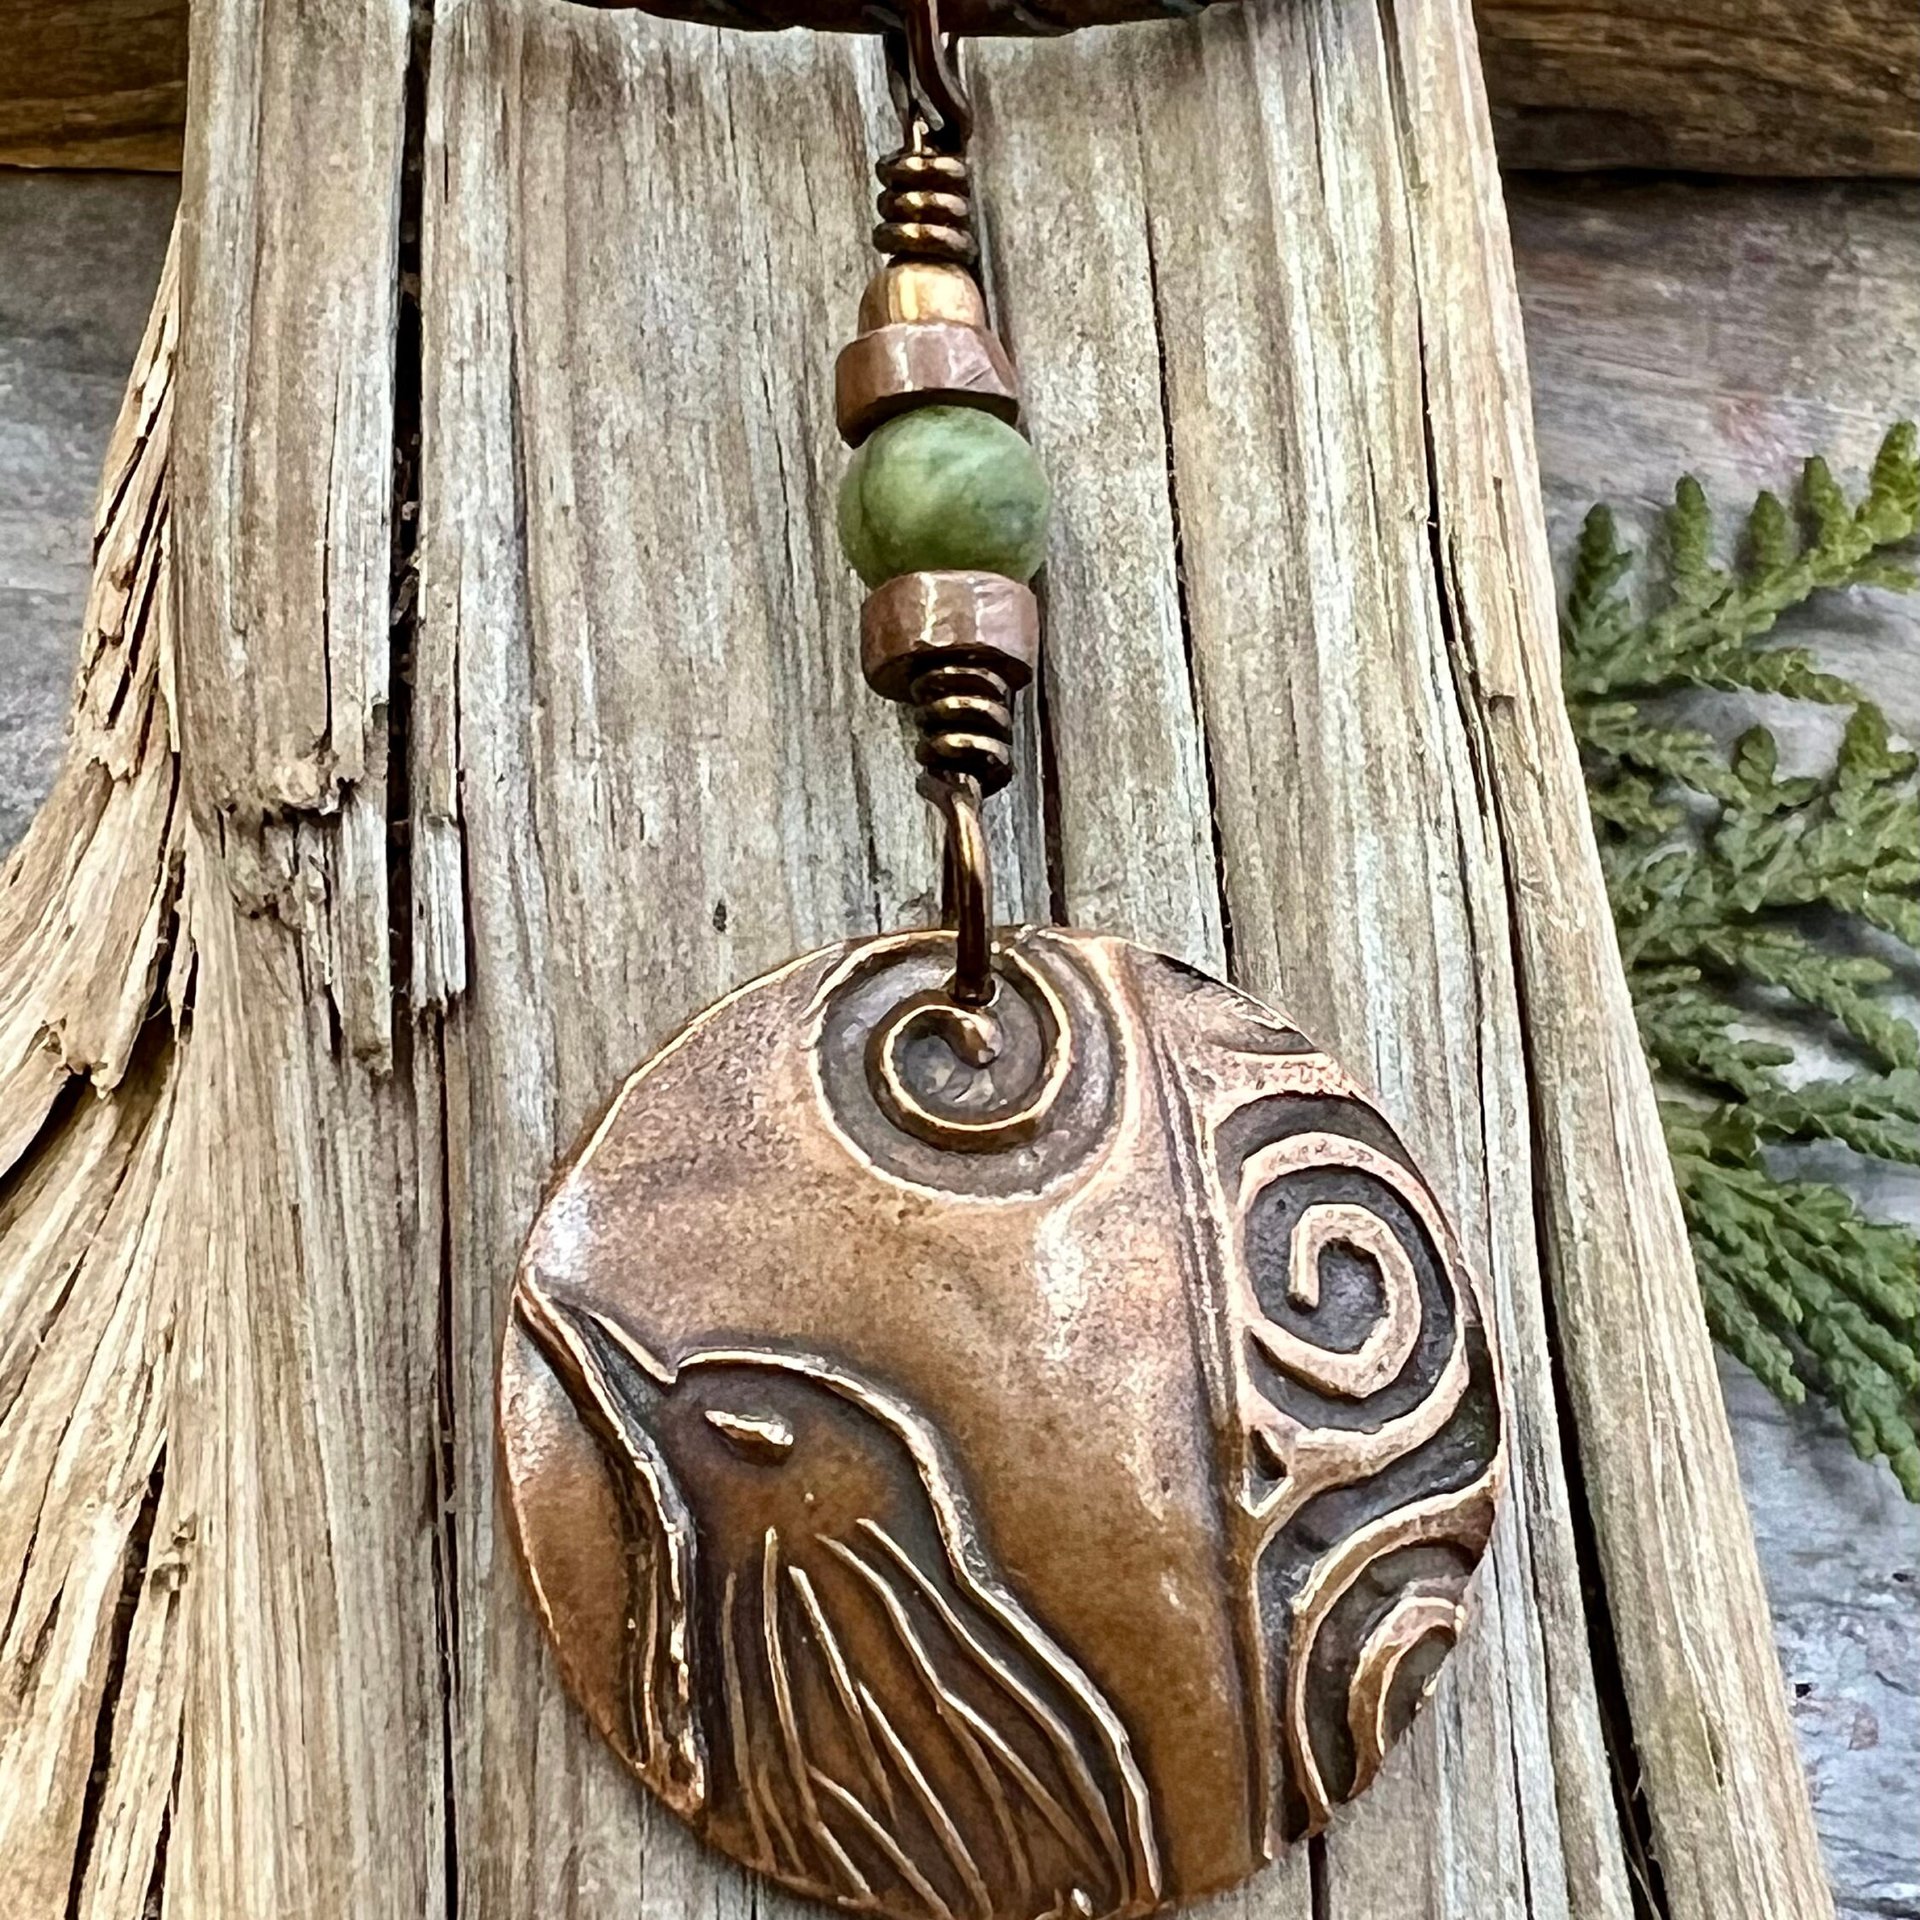 Copper Raven Pendant, Irish Celtic Jewelry, Connemara Marble, Pagan Wicca Necklace, Witch Necklace, Raven Moon, Anniversary Gifts, Spirals